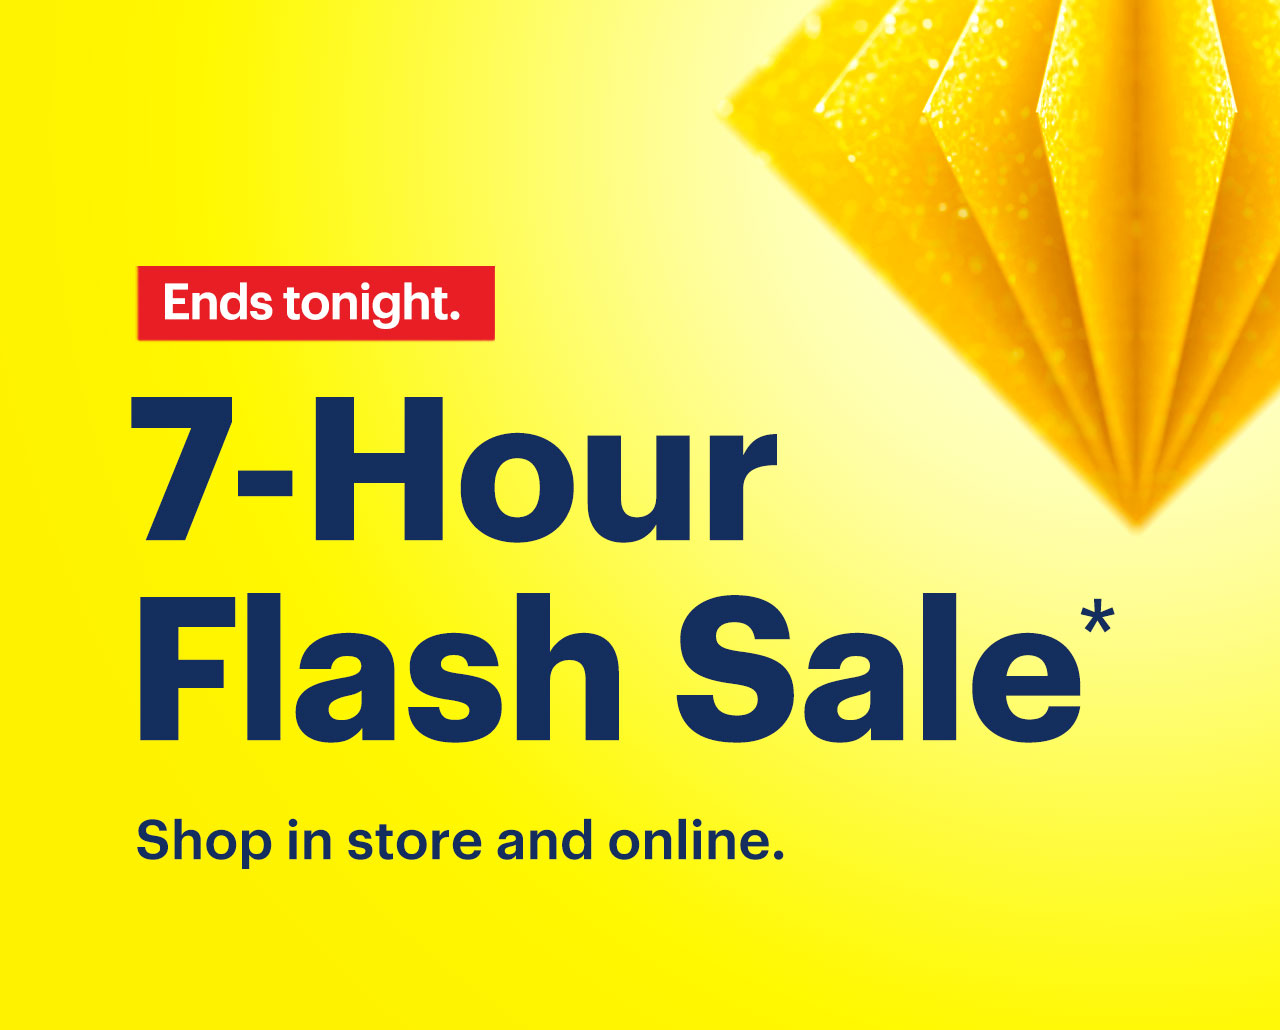 7-Hour Flash Sale. Shop in store and online. Ends tonight. Limited quantities. No rainchecks. Reference disclaimer.